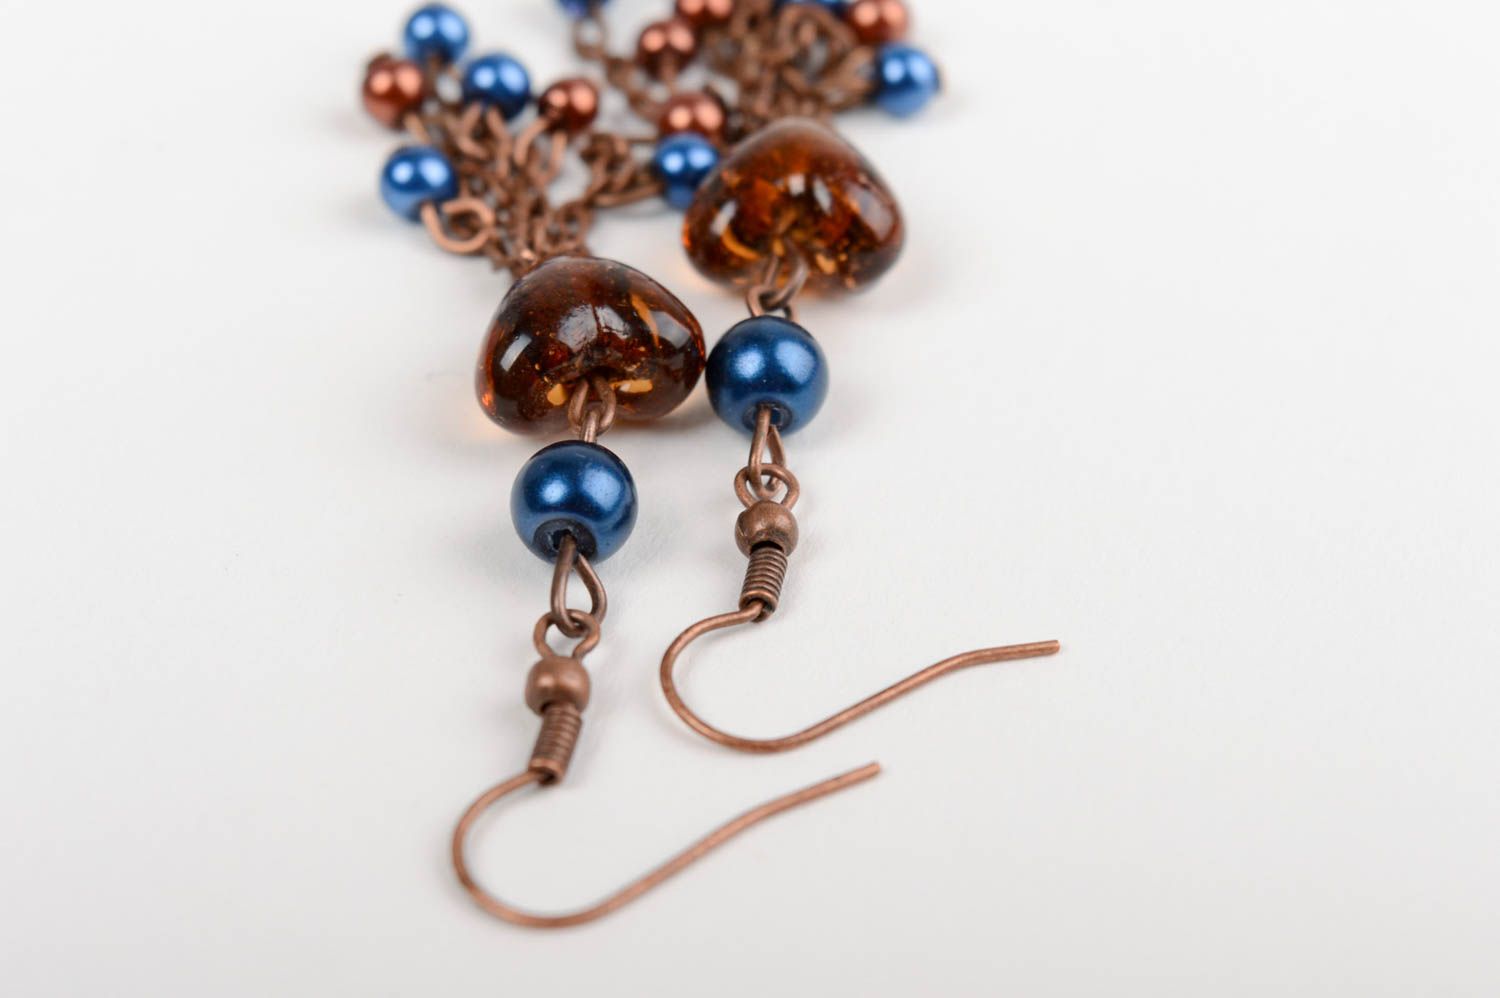 Handmade earrings with Venetian glass beads and ceramics pearls on metal chains photo 3